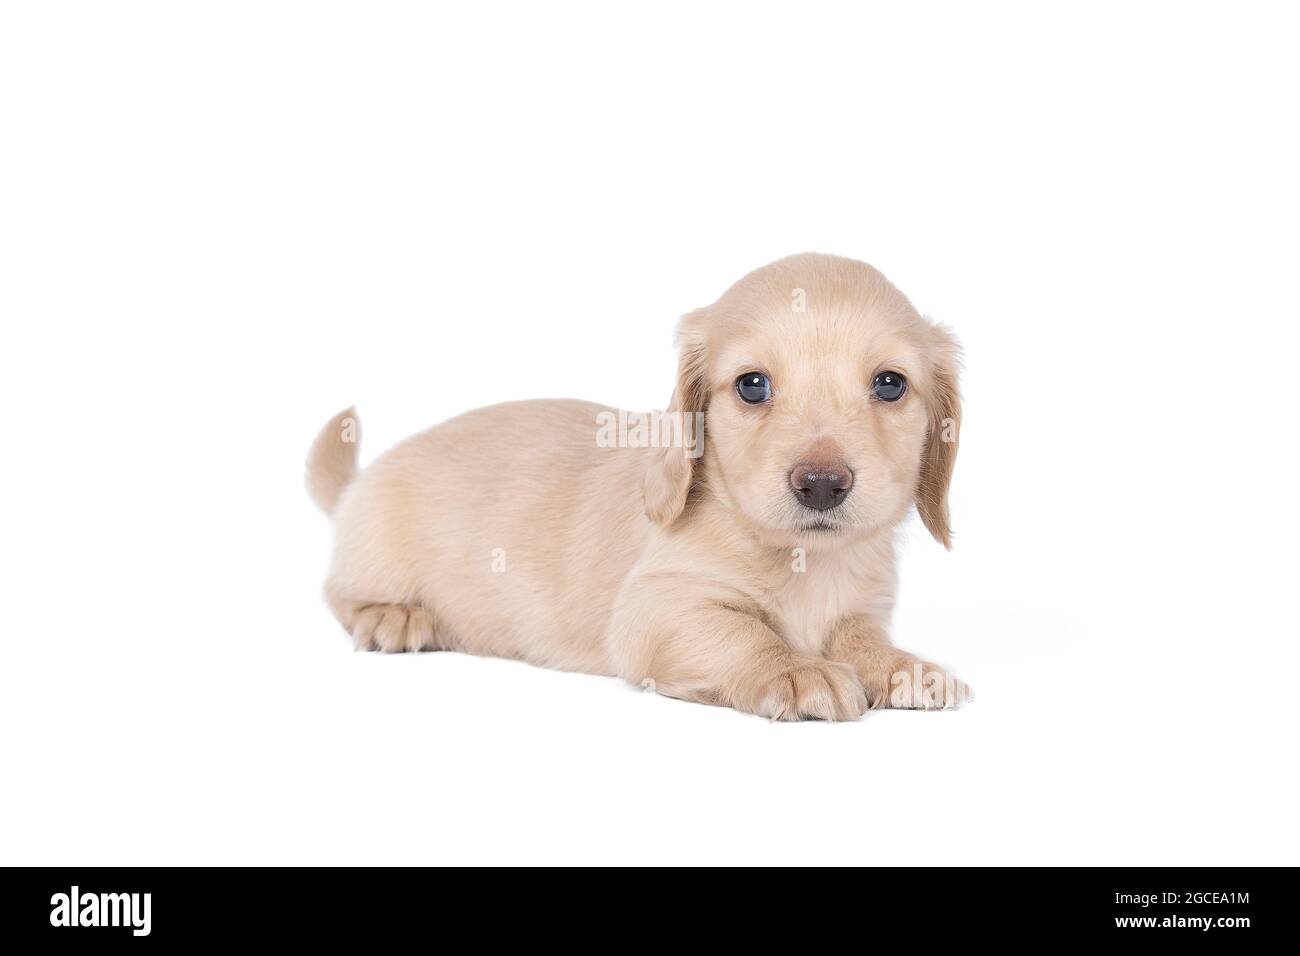 Closeup of a blonde longhaired  wire-haired Dachshund  dog isolated on a white background Stock Photo